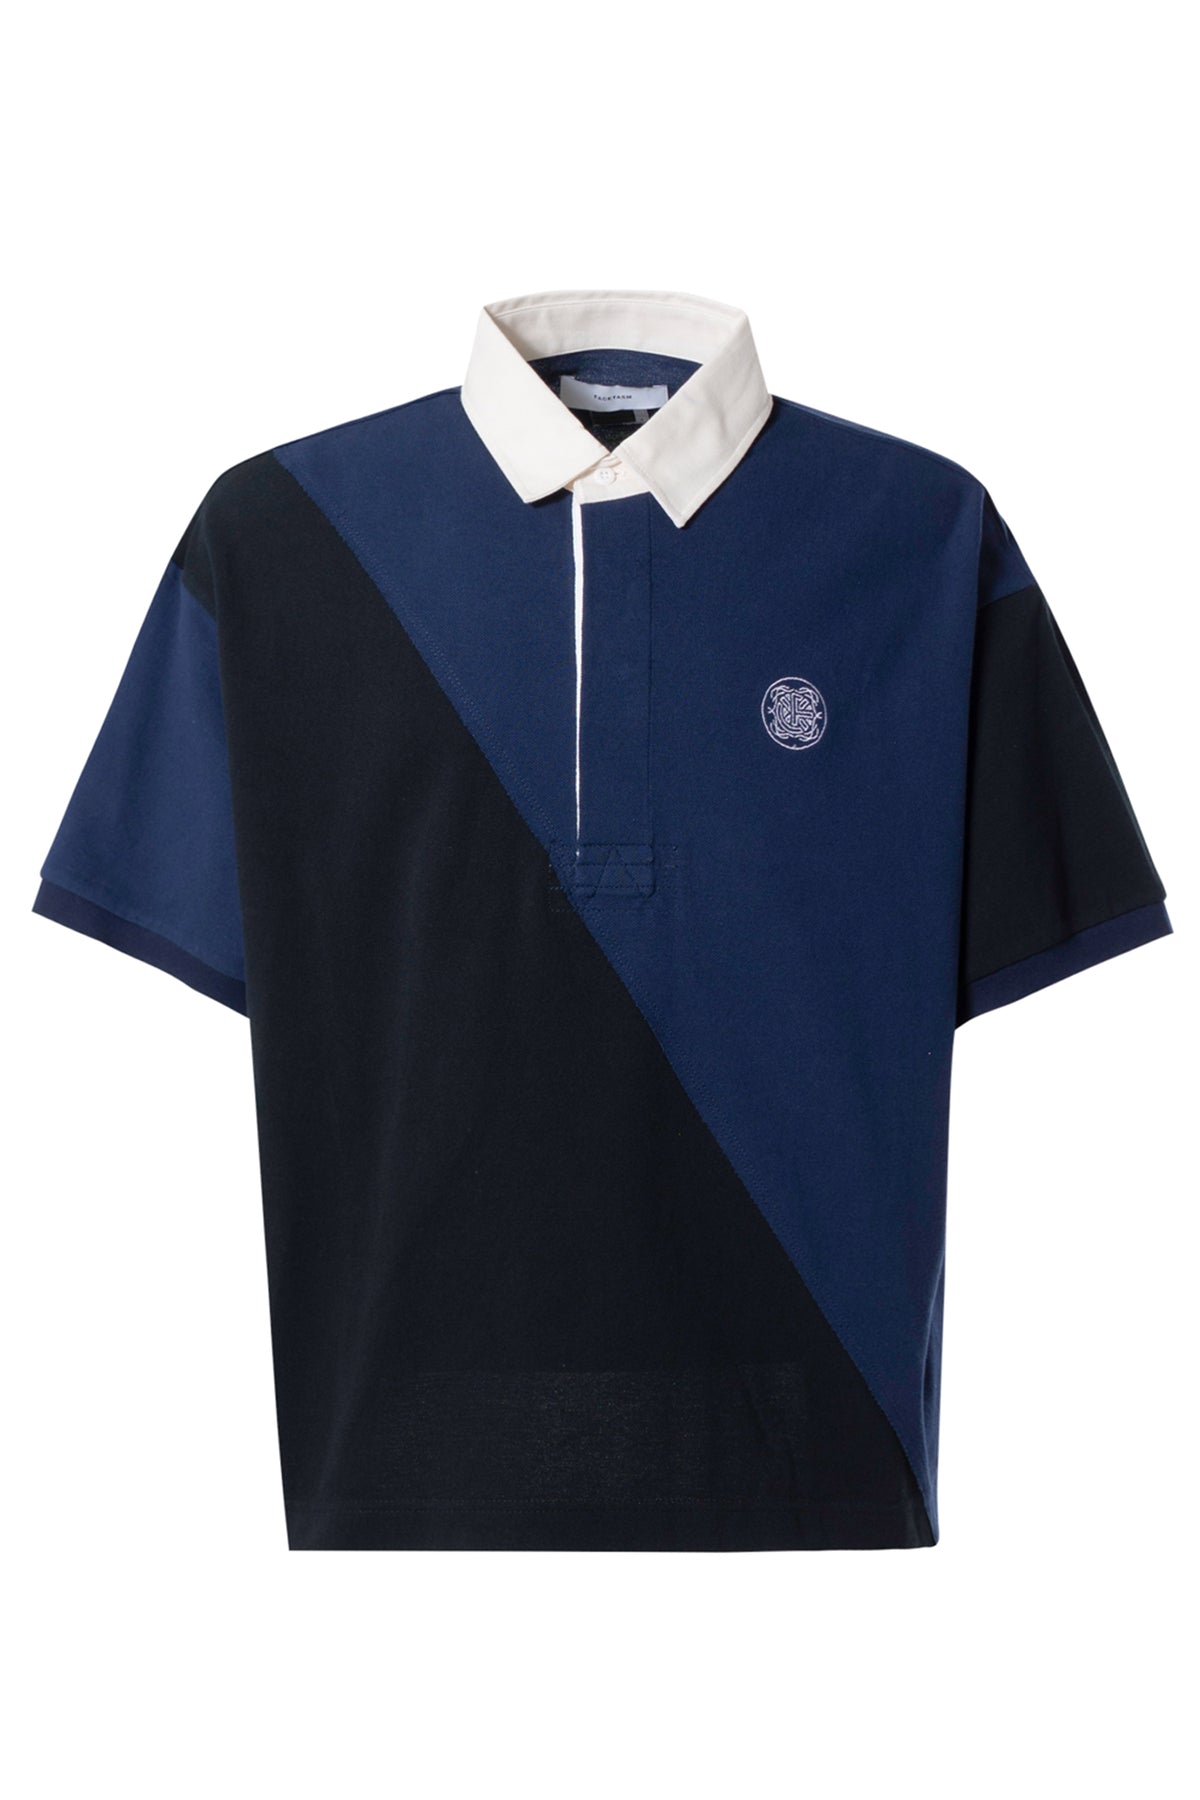 FACETASM 23SS RUGBY POLO / NVY BLK - NUBIAN